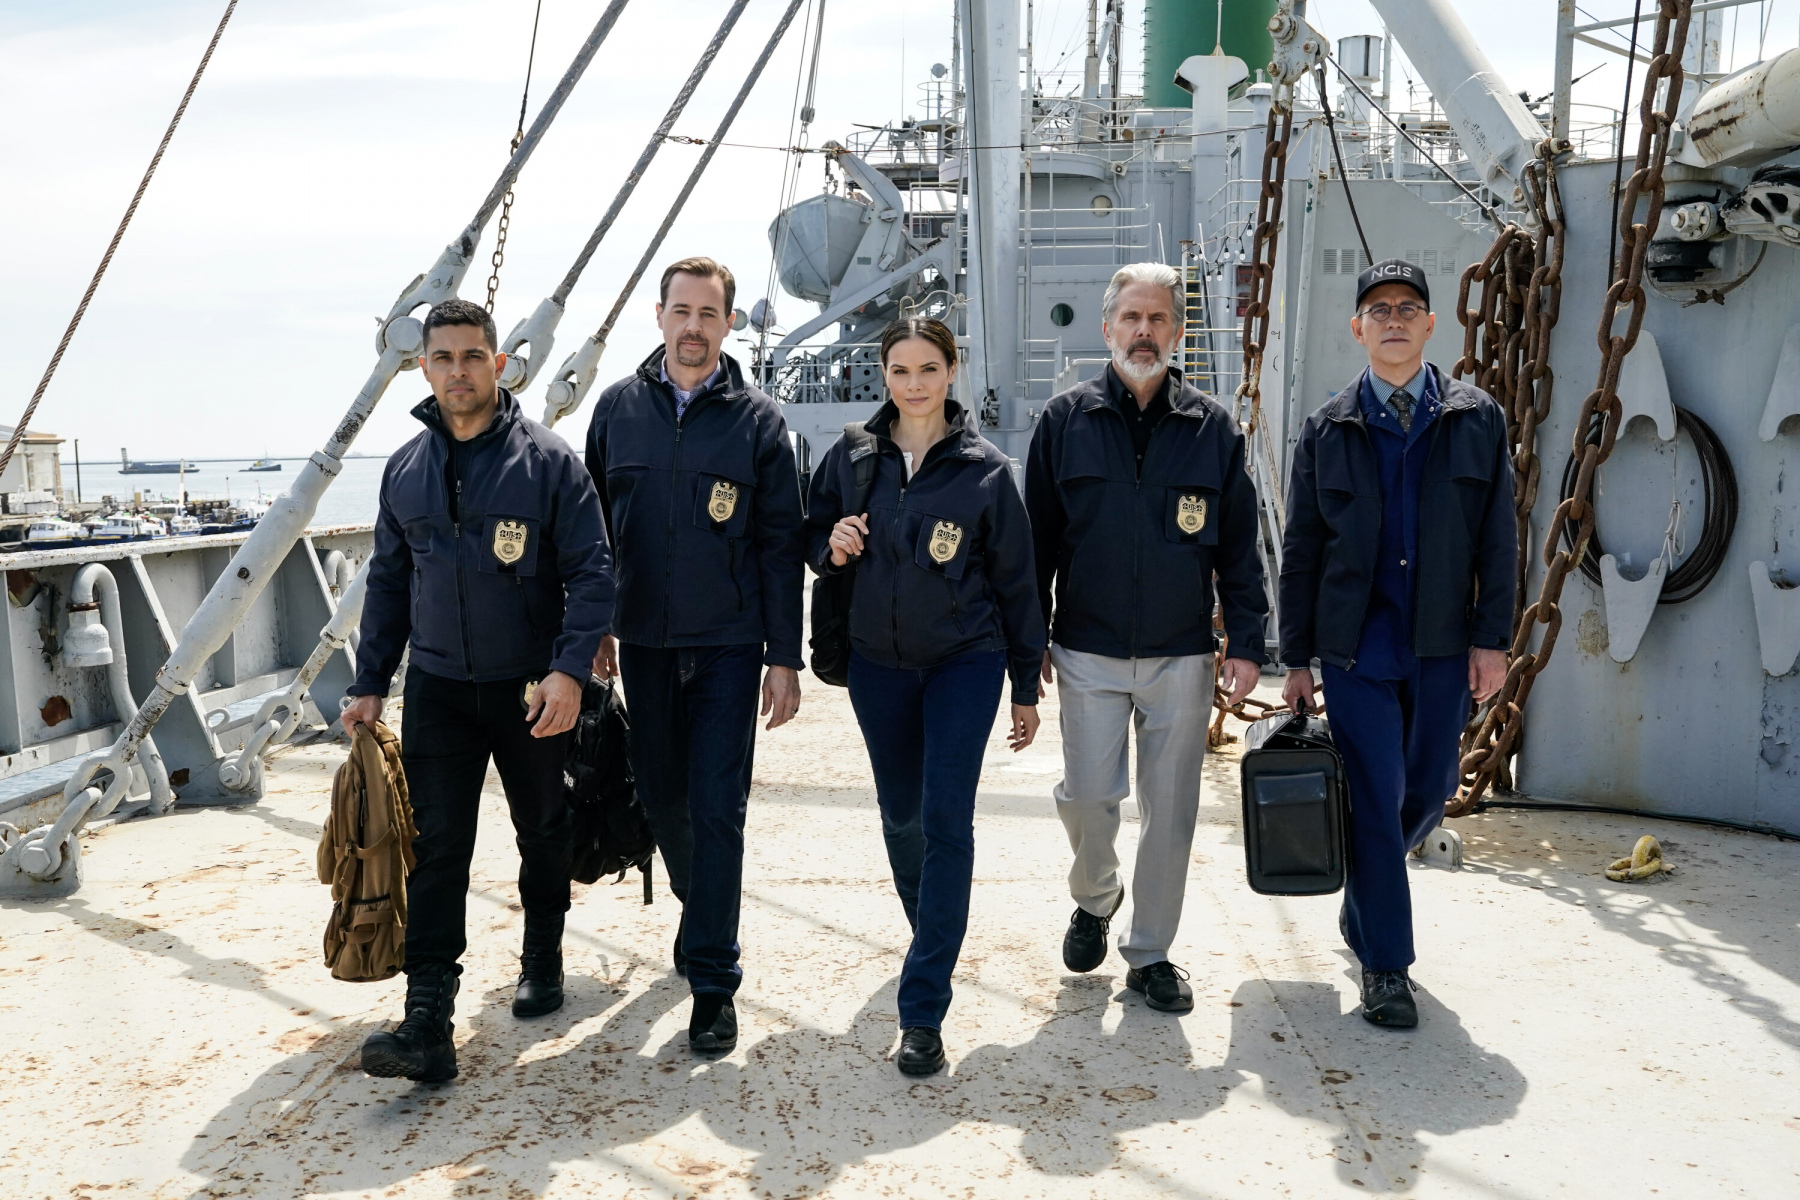 Wilmer Valderrama as Nicholas “Nick” Torres, Sean Murray as Timothy McGee, Katrina Law as Jessica Knight, Gary Cole as Alden Parker, and Brian Dietzen as Jimmy Palmer on NCIS.